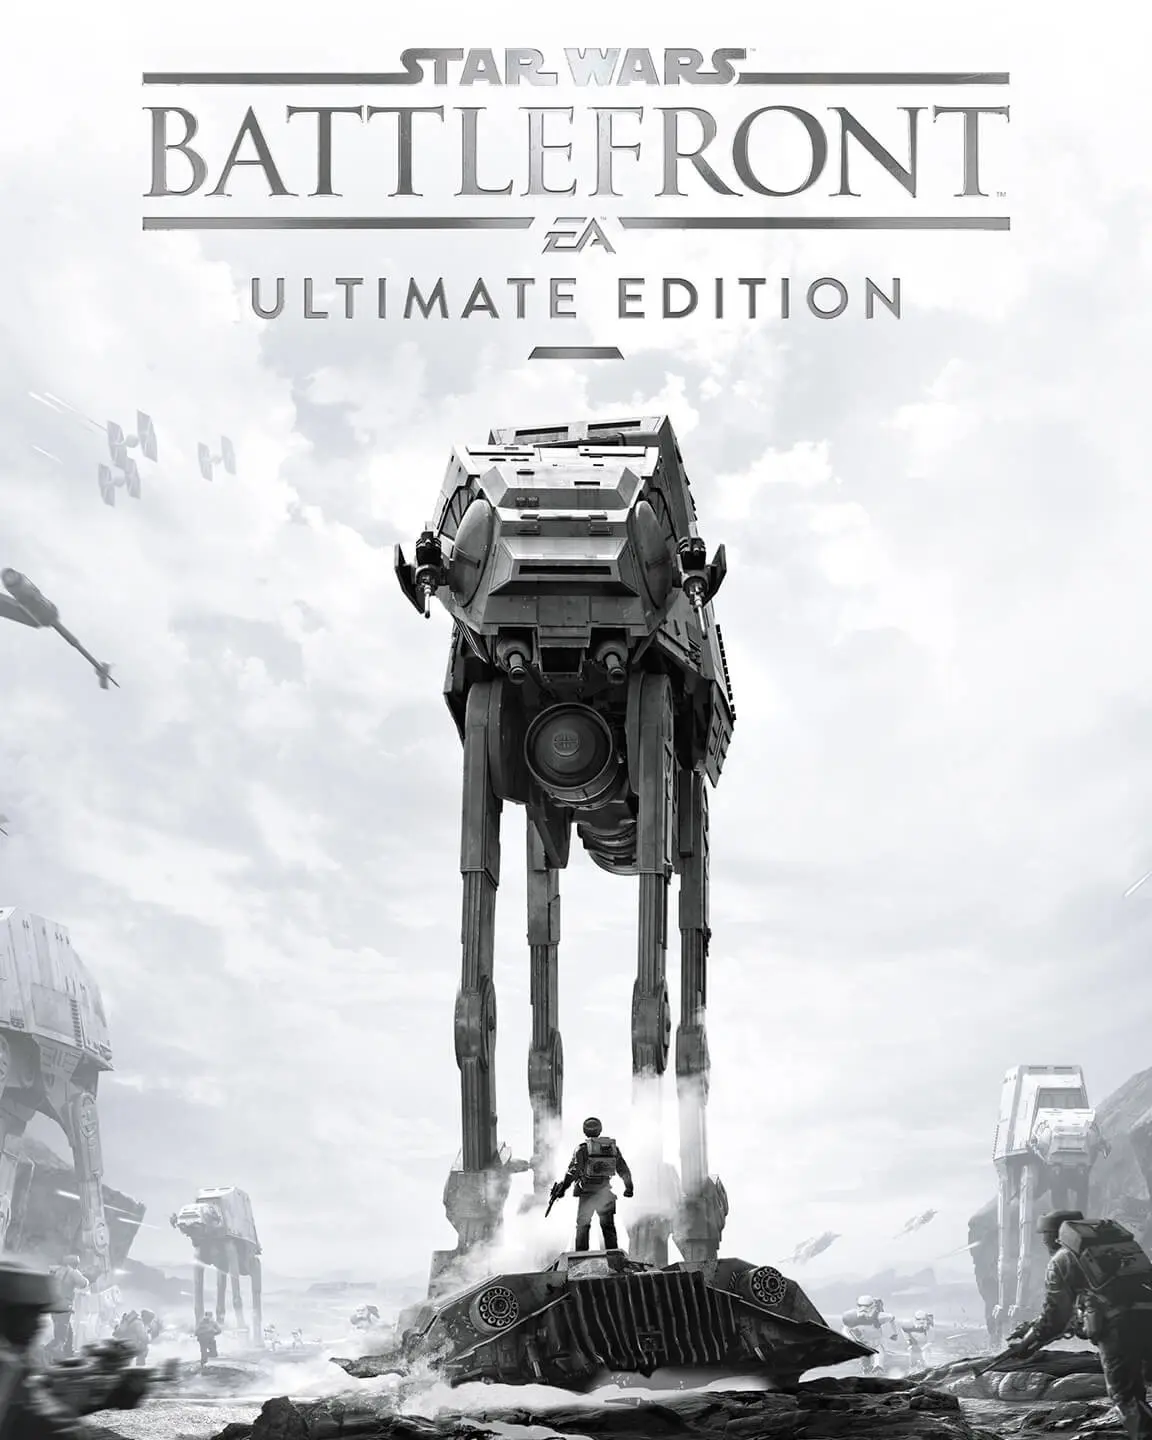 Star Wars: Battlefront Ultimate Edition (AR) (Xbox One / Xbox Series X|S) - Xbox Live - Digital Code